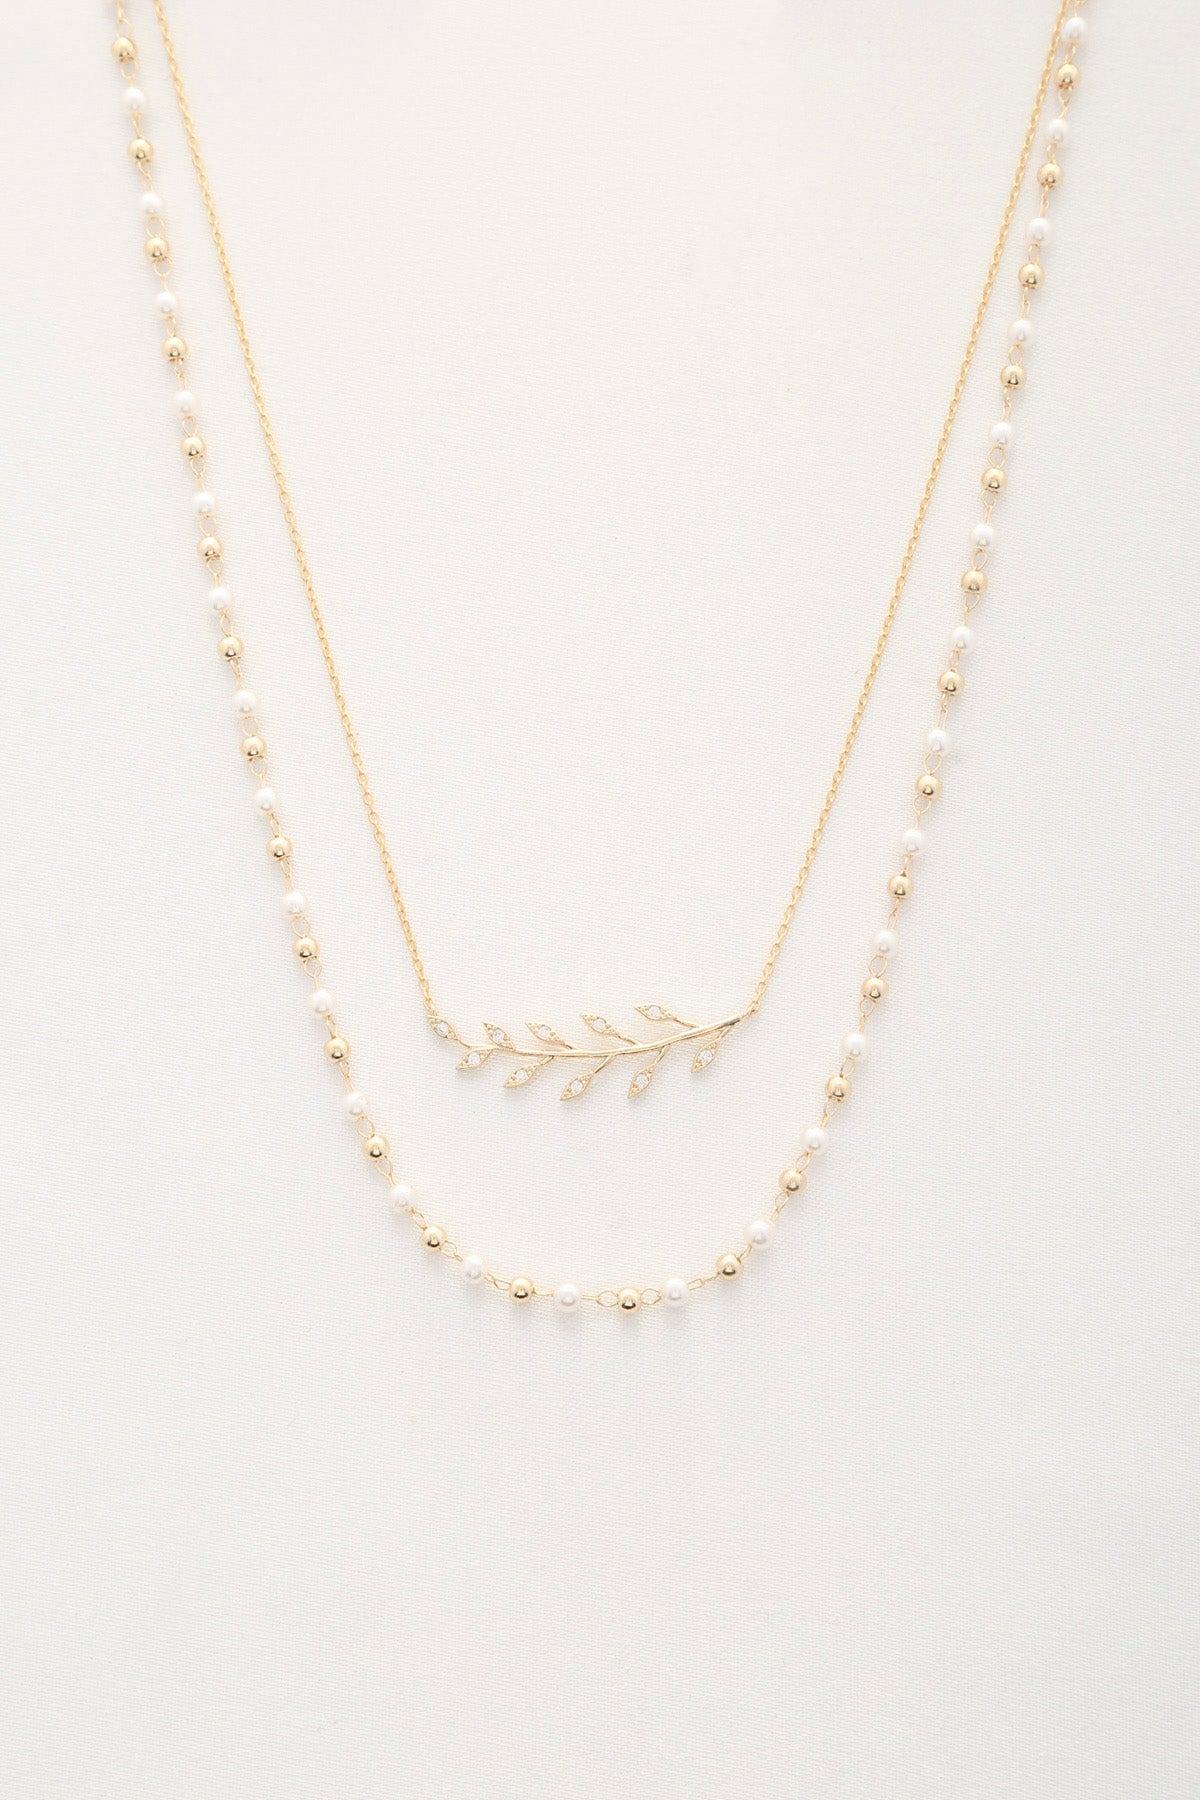 Gold Pearl Beaded Leaf Dainty Necklace